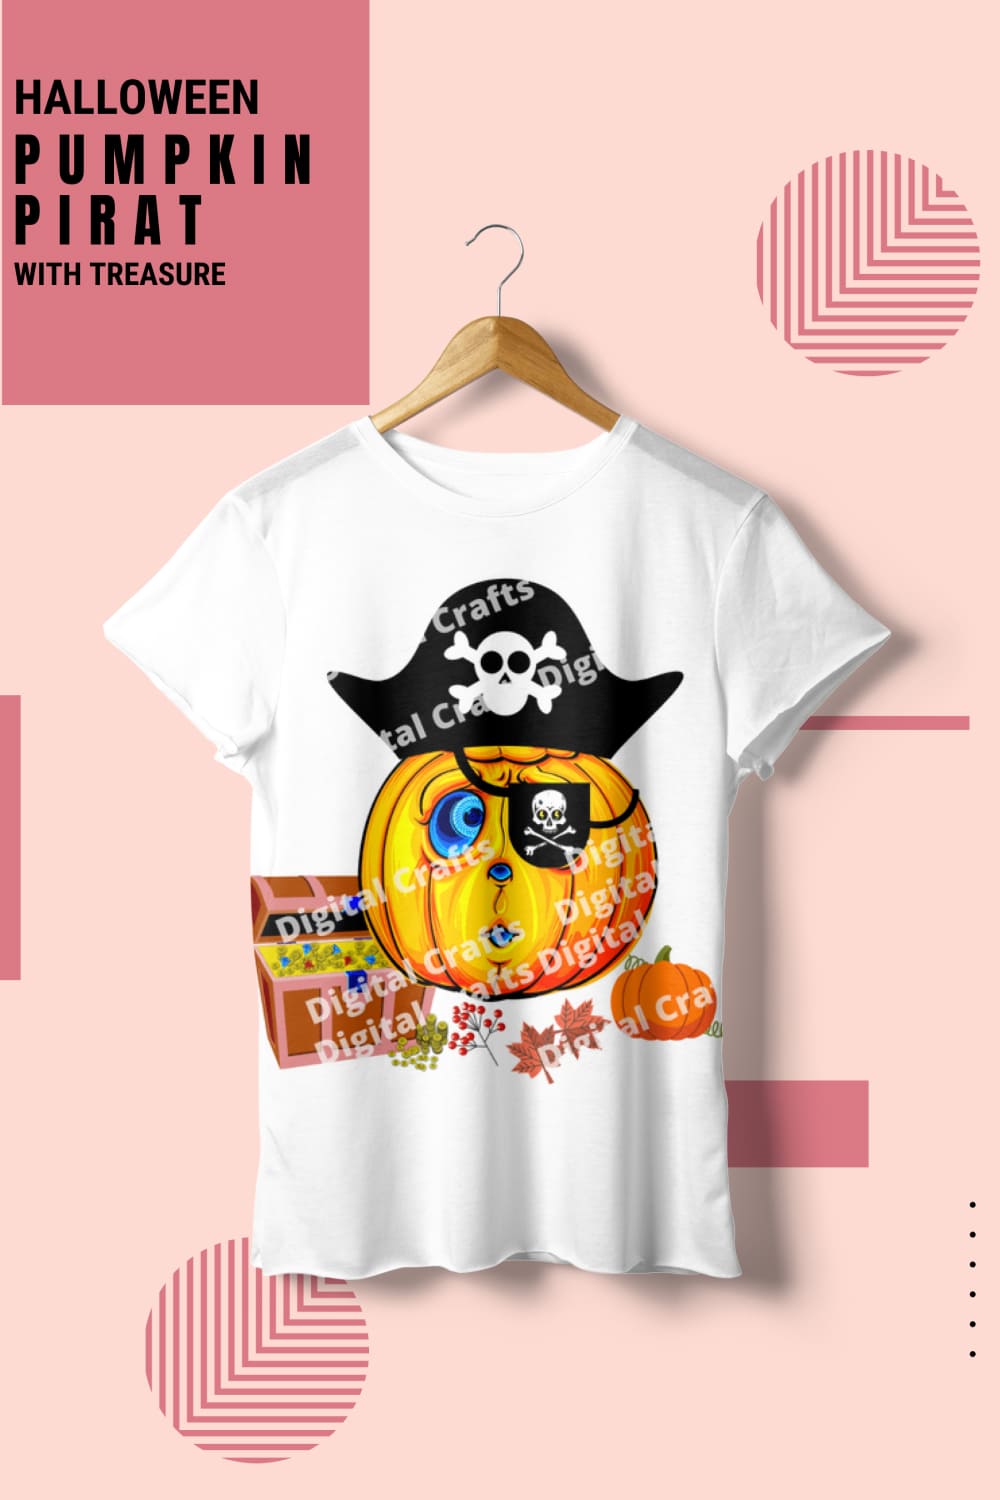 Image of white t-shirt with adorable treasure pirate pumpkin print.